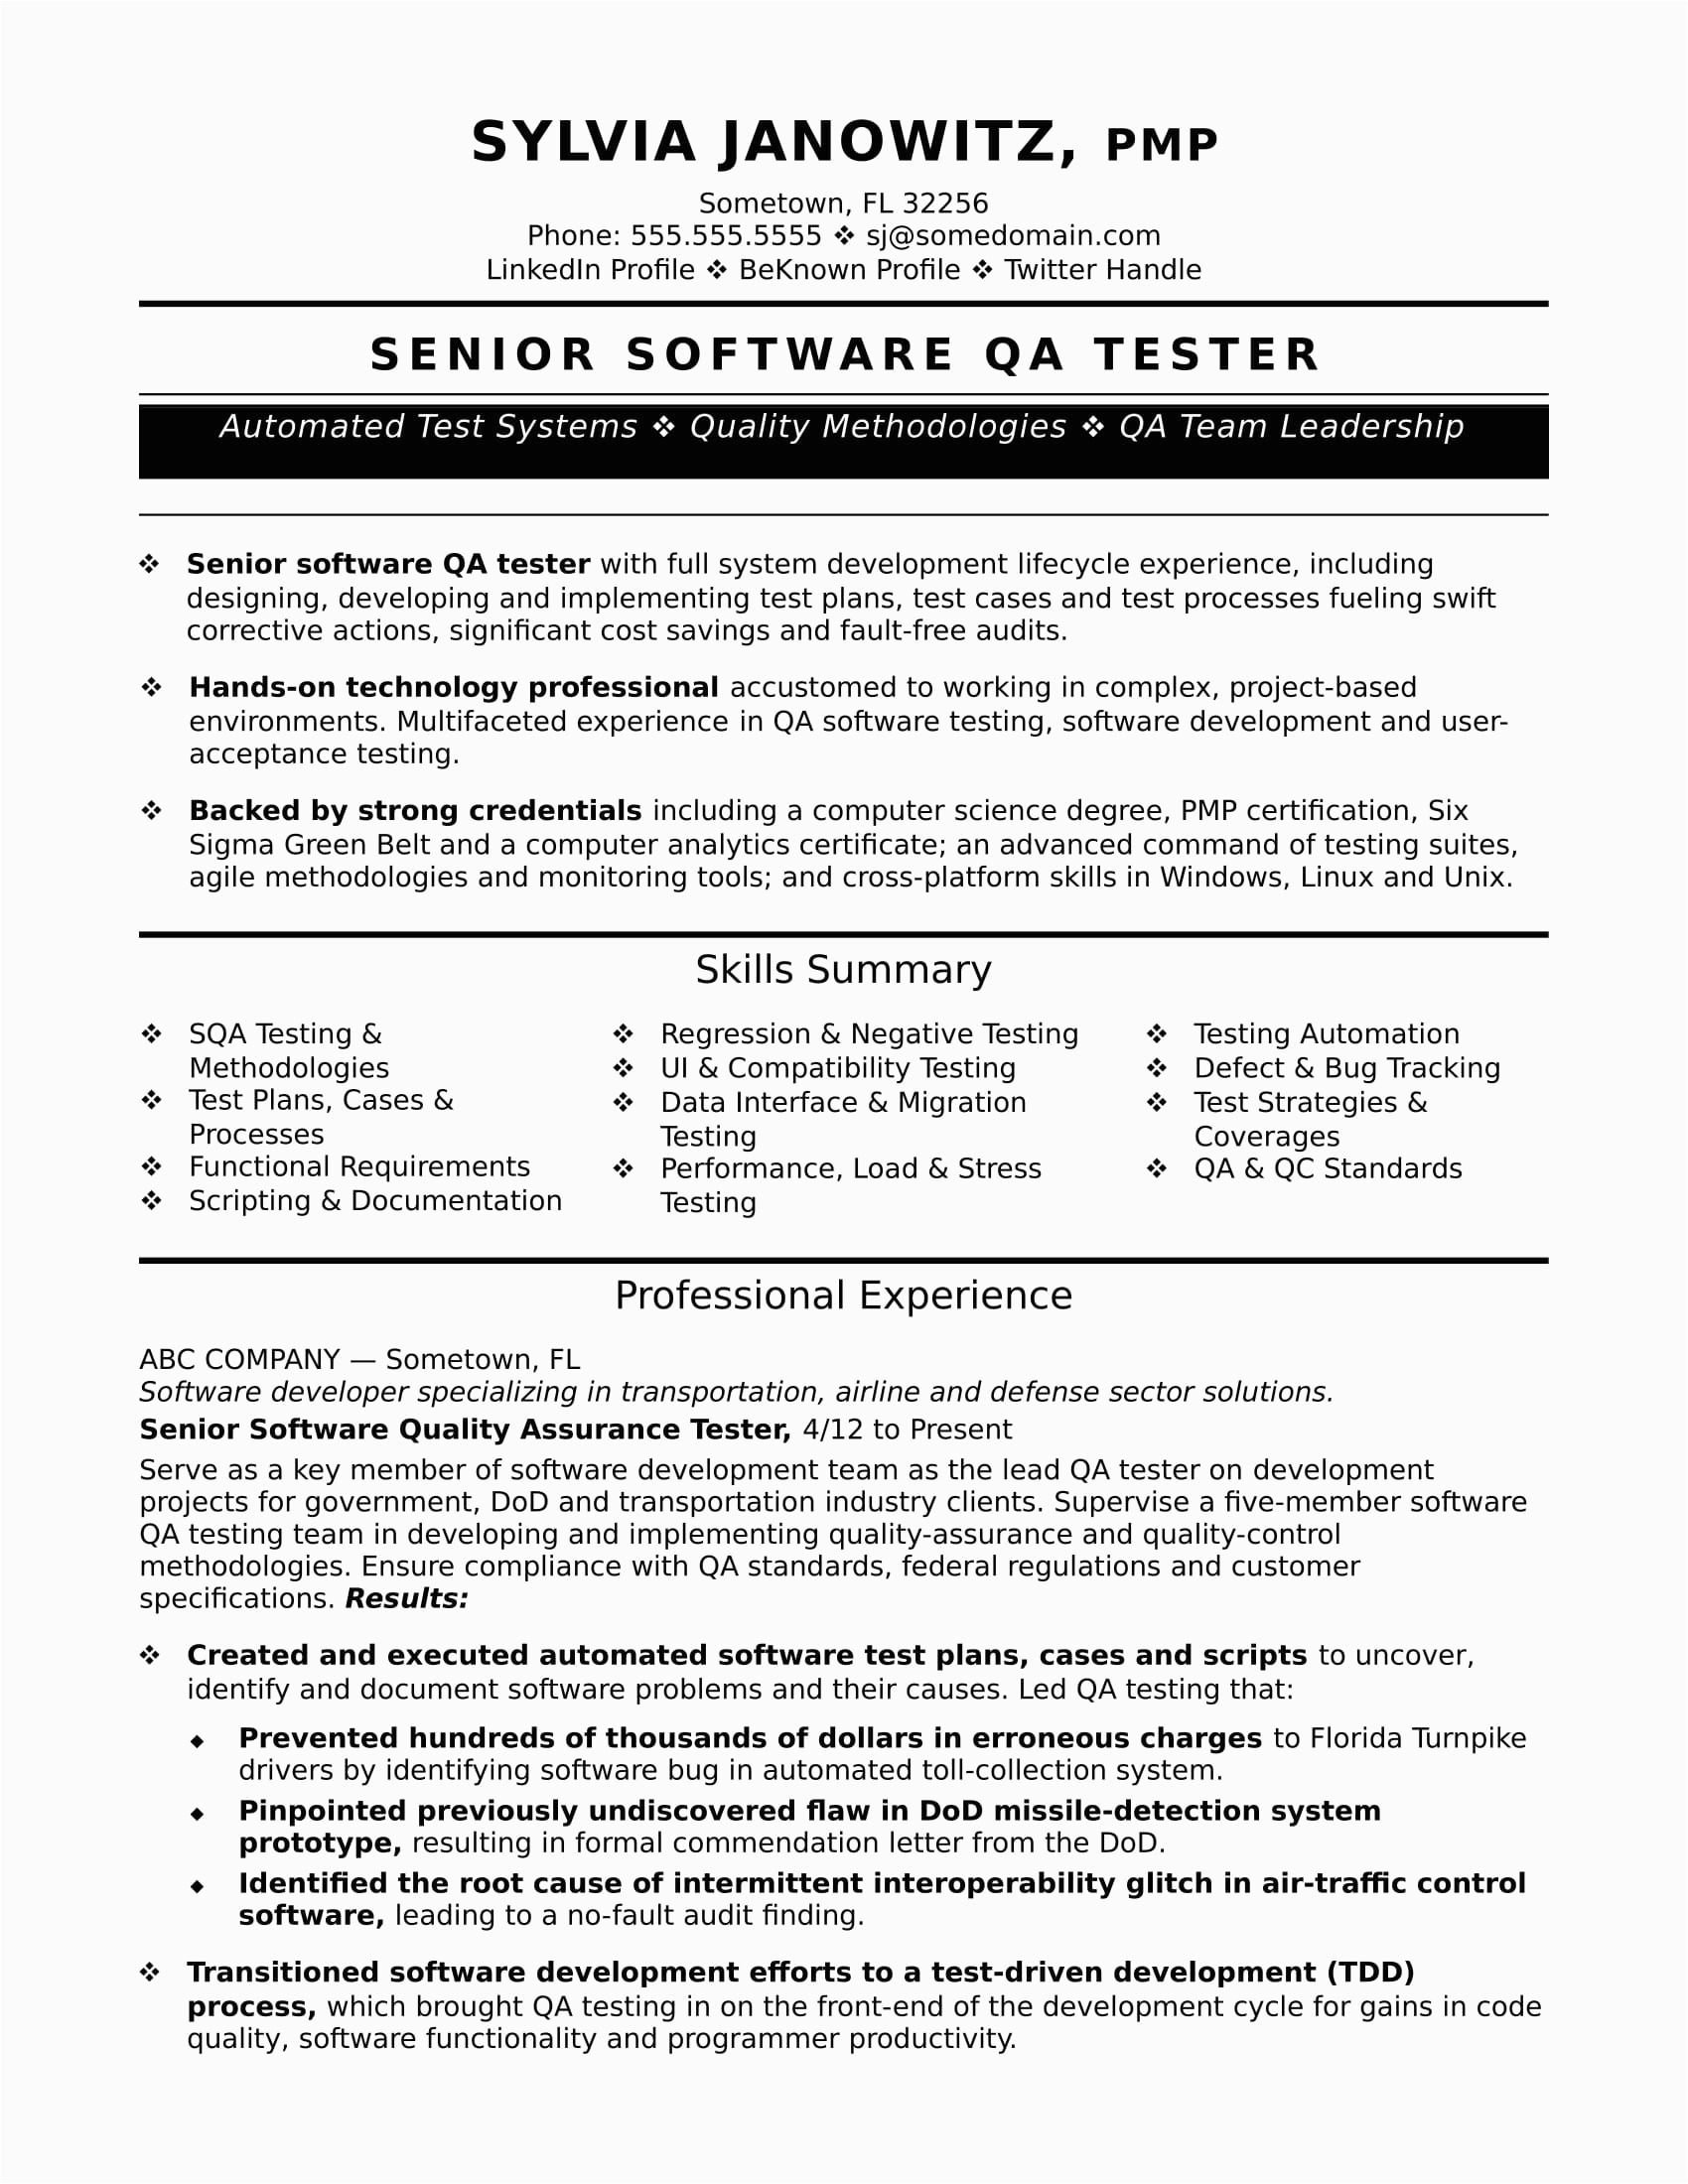 Sample Resume for 15 Years Experience Download Manual Testing Resume Sample for 5 Years